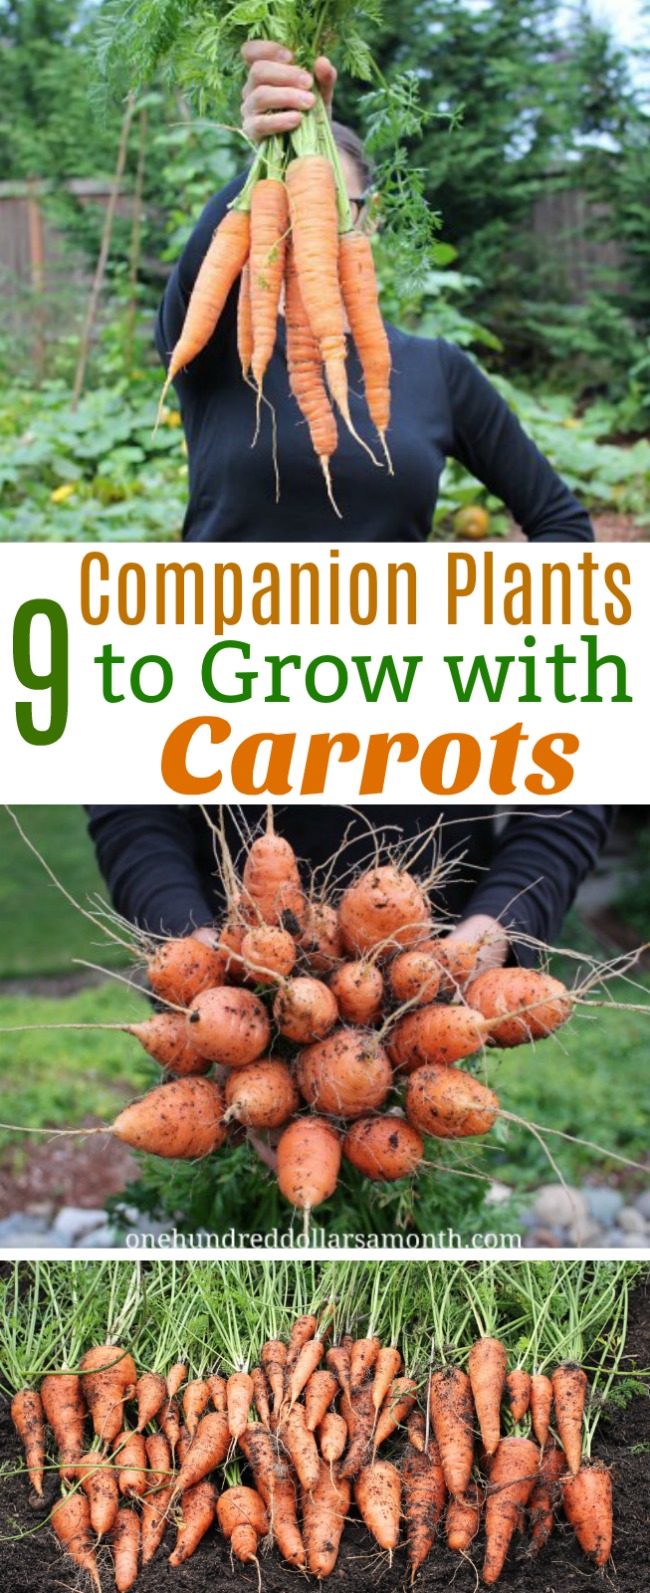 9 Companion Plants to Grow With Carrots